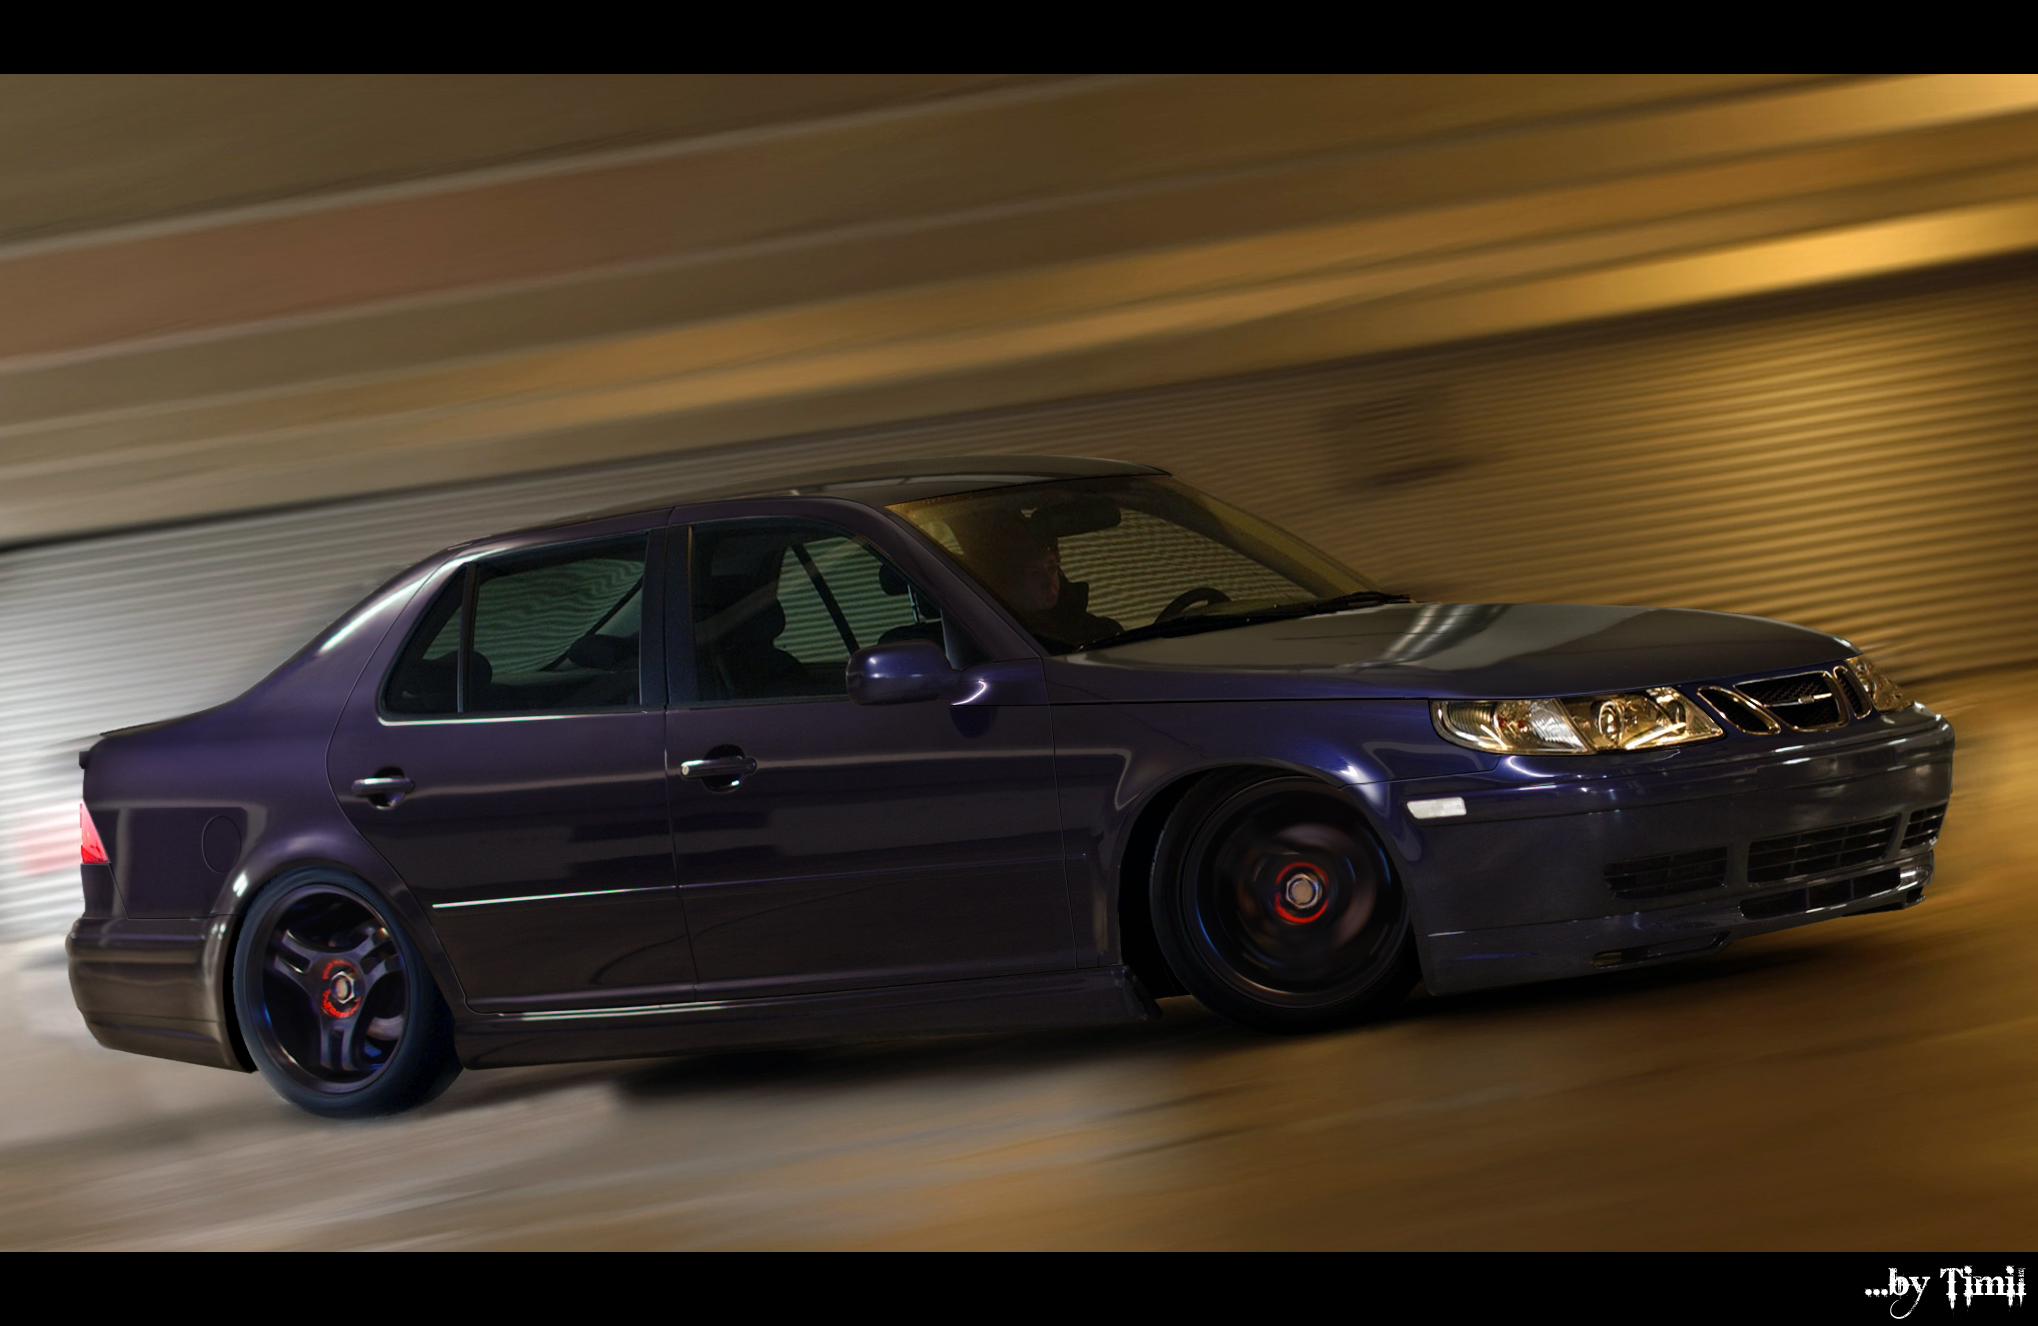 car brand Saab 9-5 models wallpapers and images - wallpapers ...